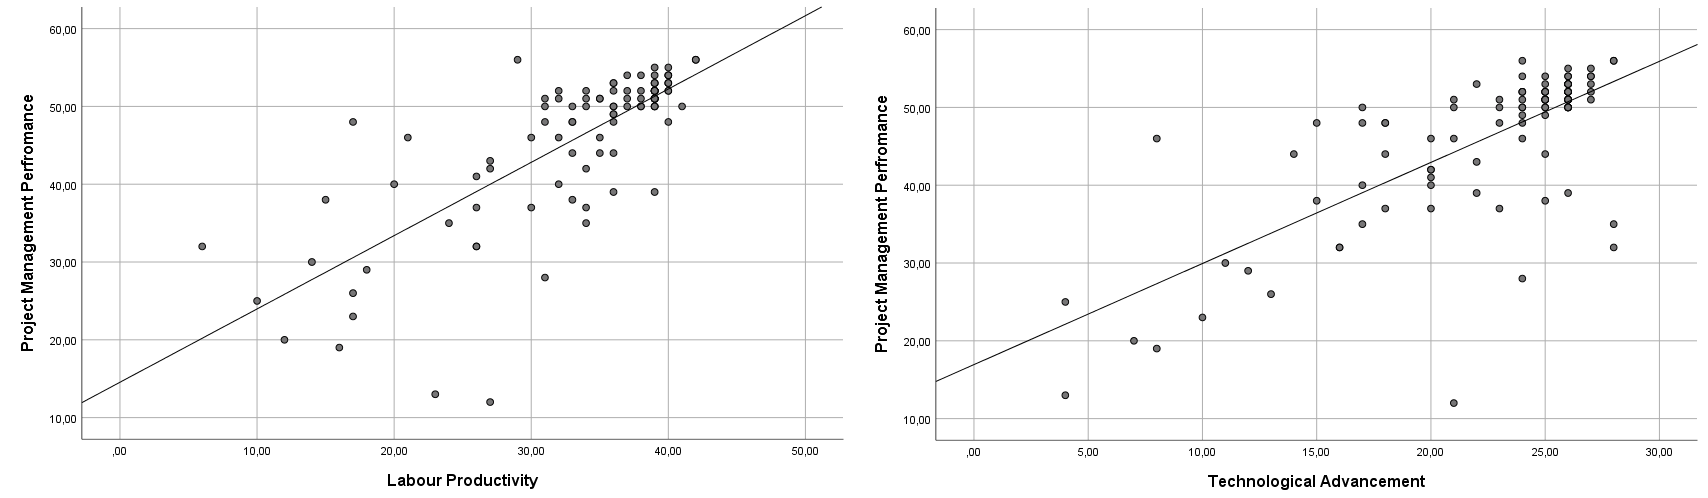 Scatterplots of independent variables against the dependent variable